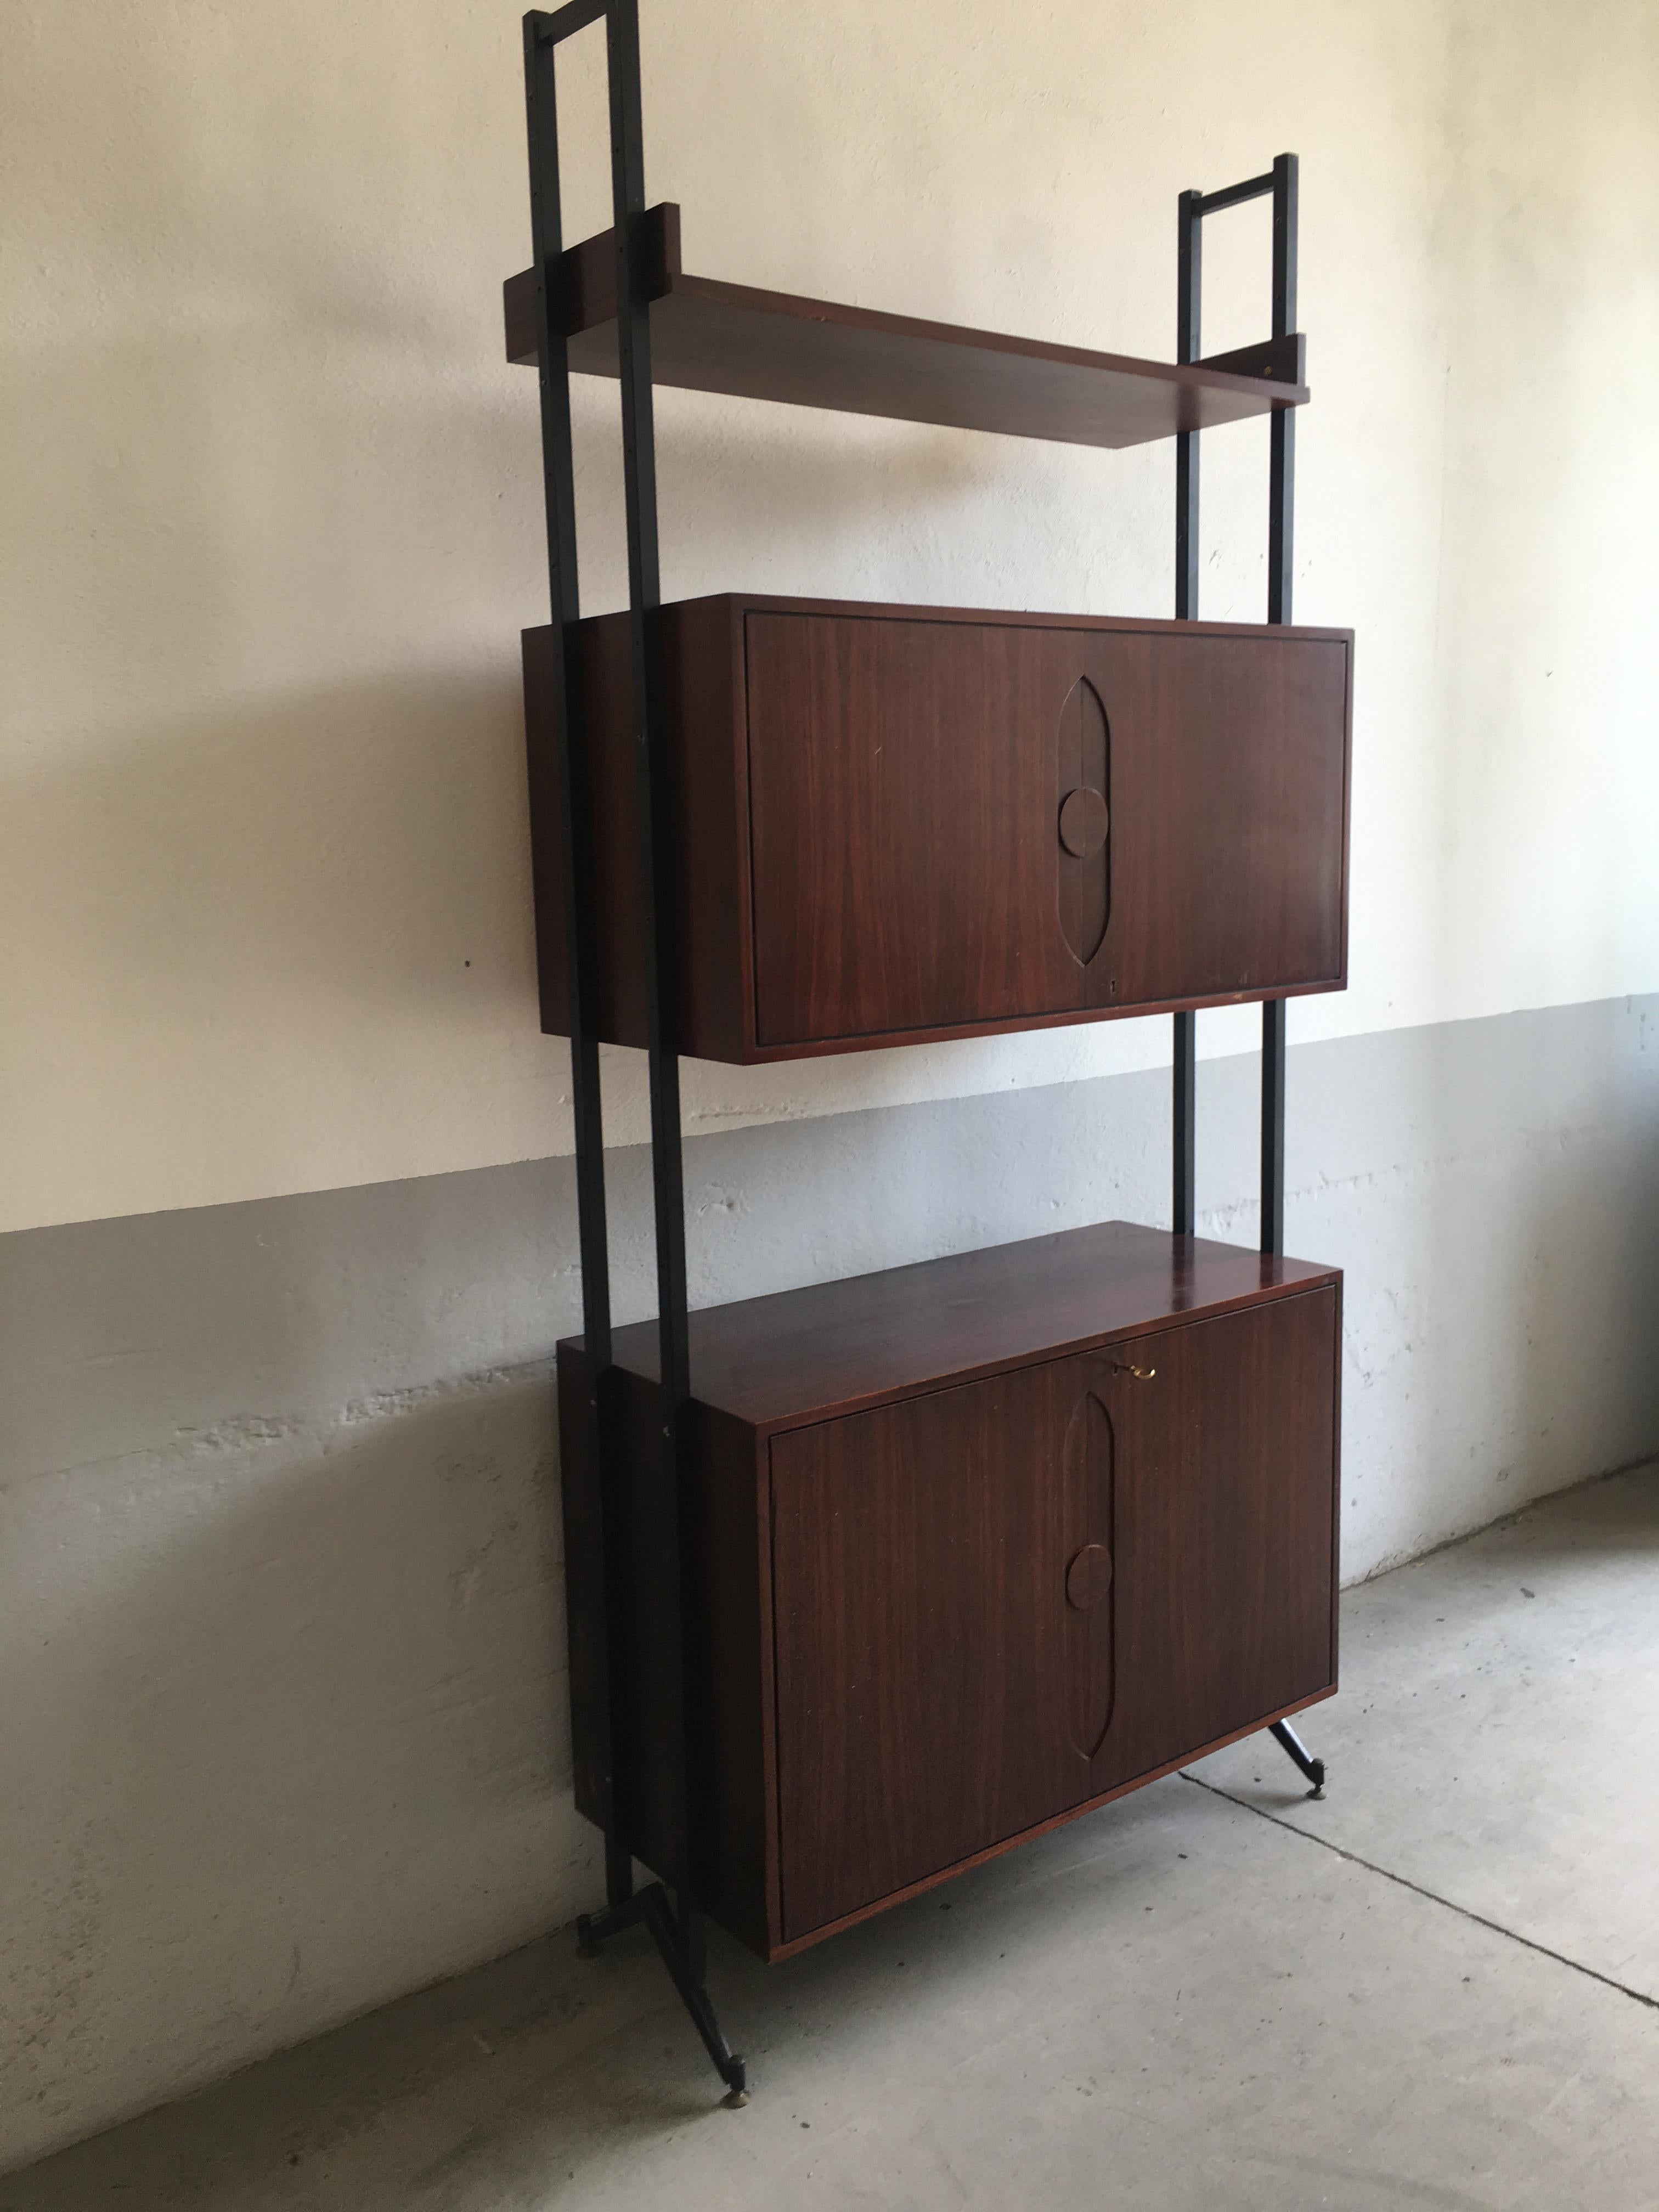 Lacquered Mid-Century Modern Dutch Wooden Bookcase with Shelf and Cabinets, 1970s For Sale